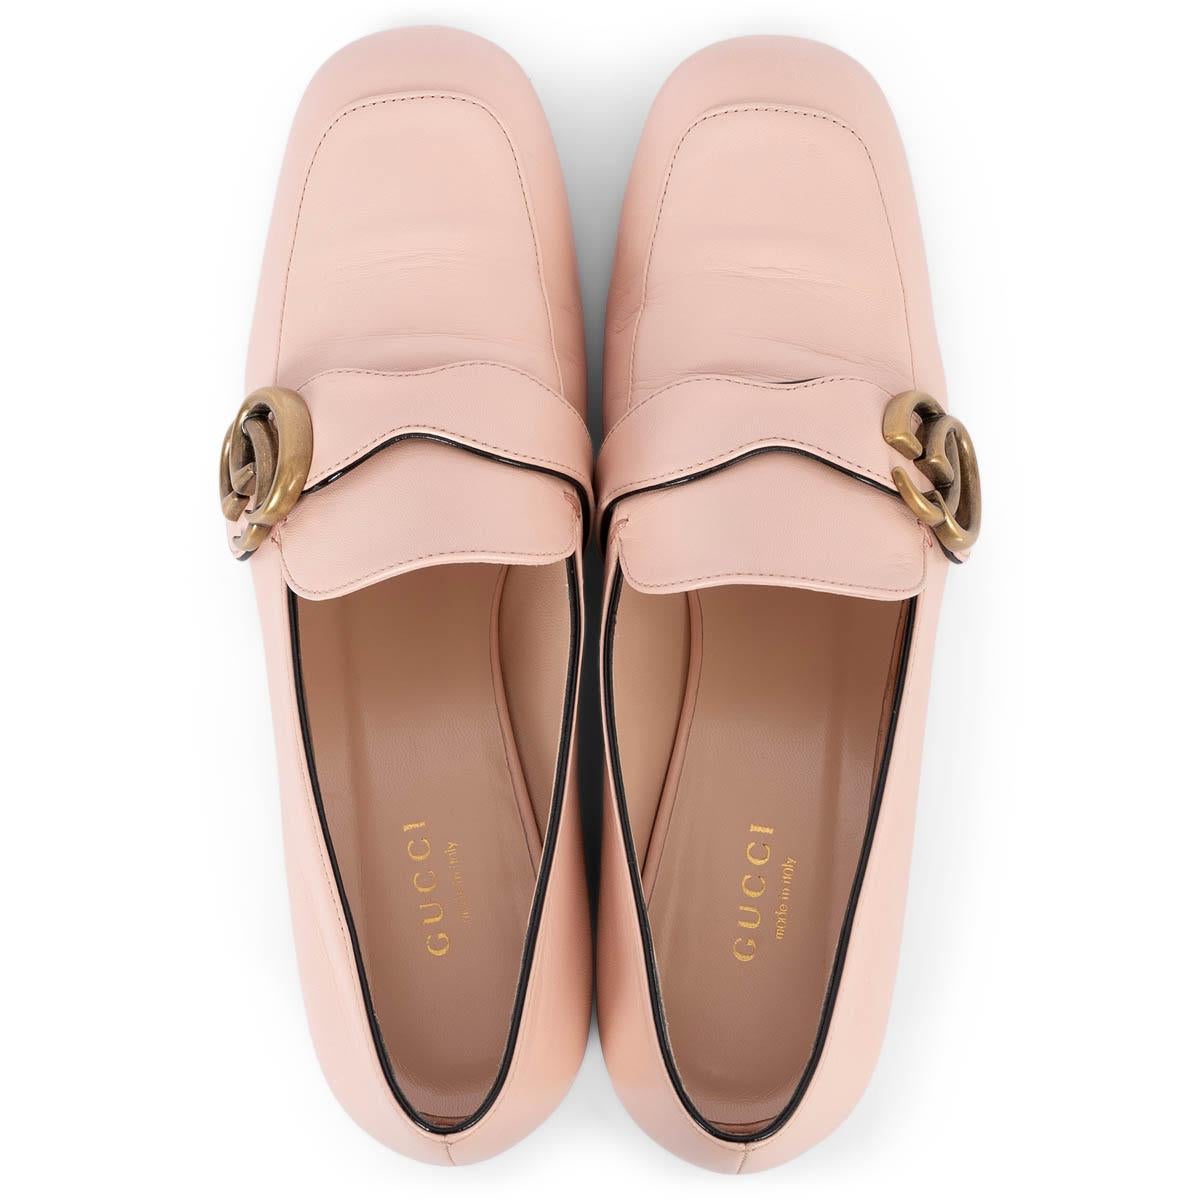 GUCCI light pink leather GG MARMONT Loafers Shoes 37.5 For Sale 1